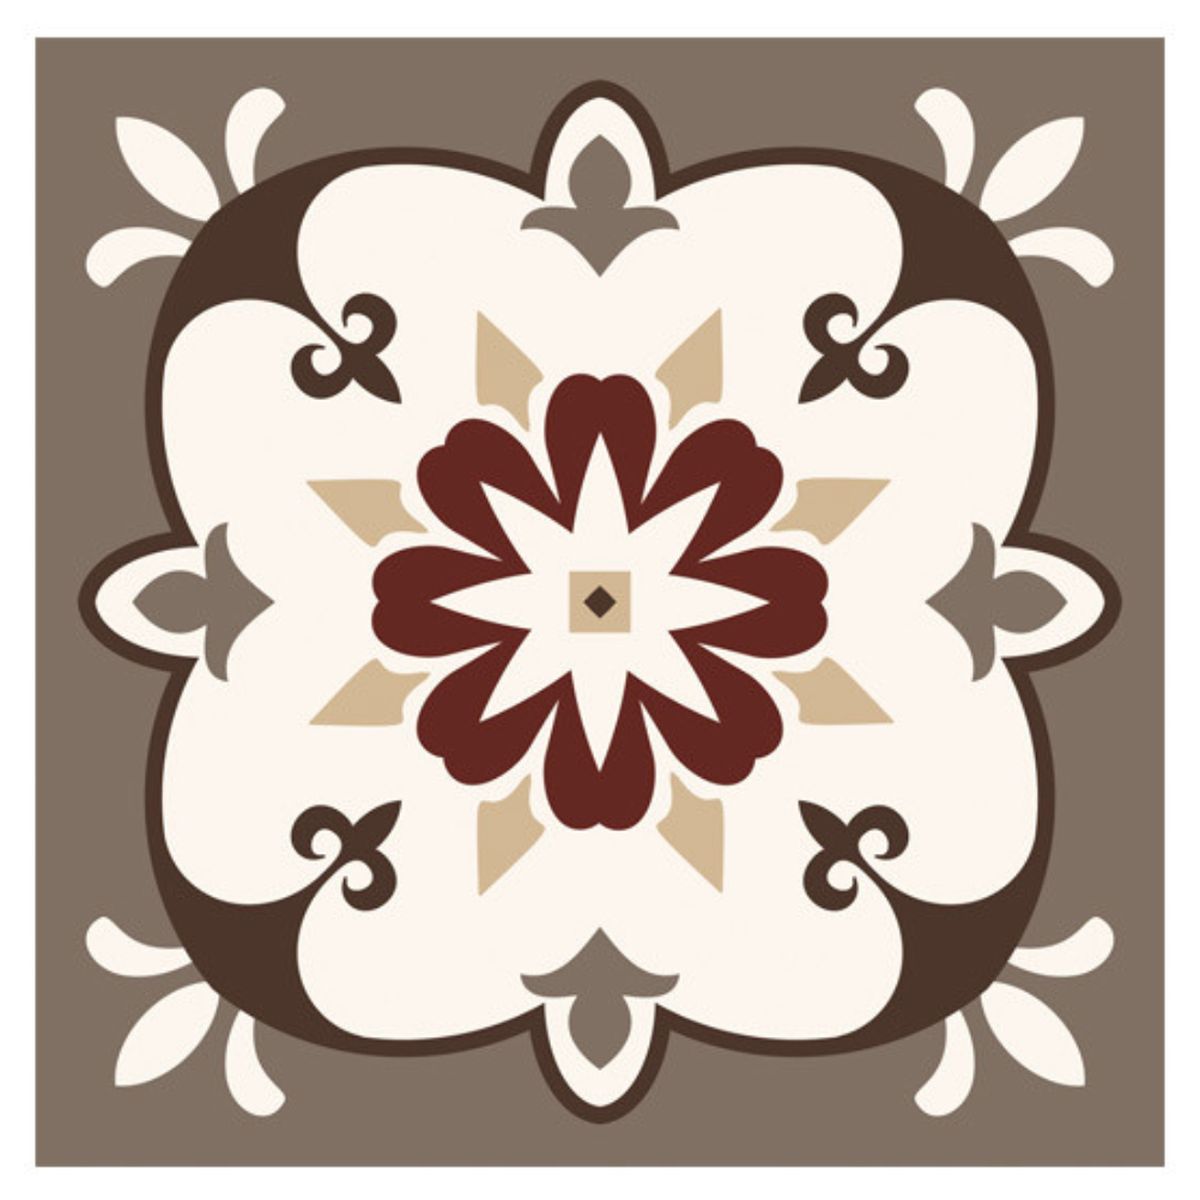 6 Cement tile stickers 15 x 15 cm - Gray and Brown